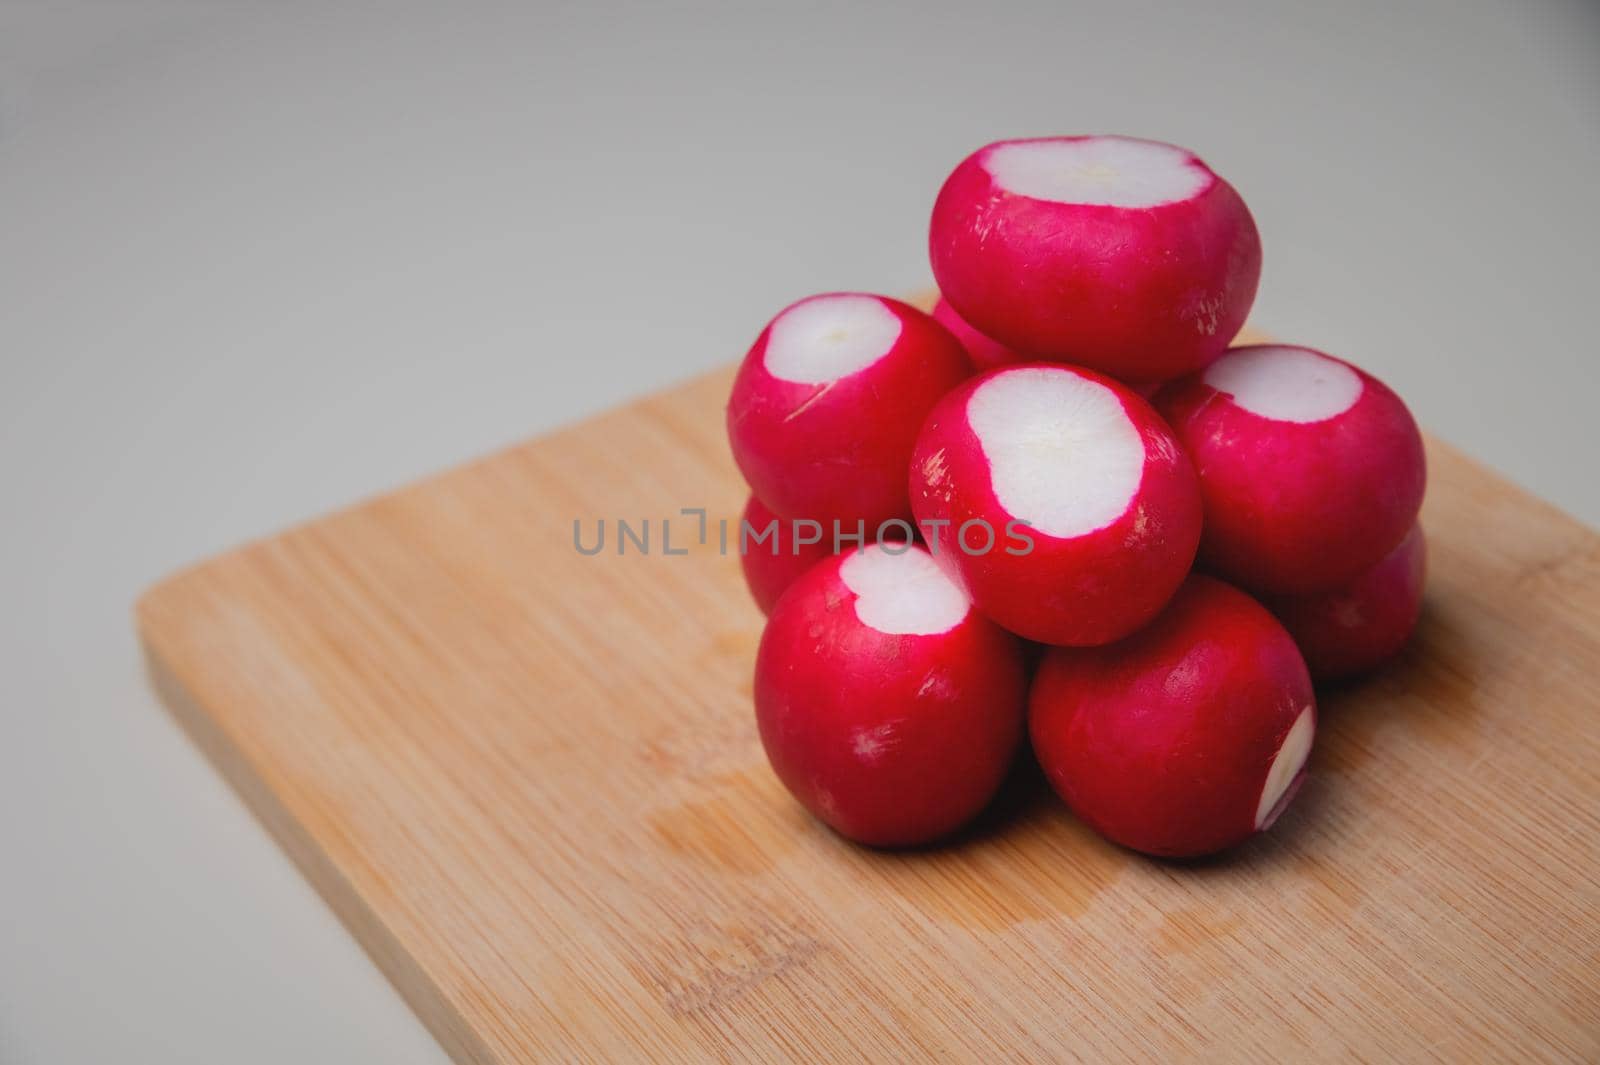 several a bright fresh bunch of radishes lies on a wooden board on the table